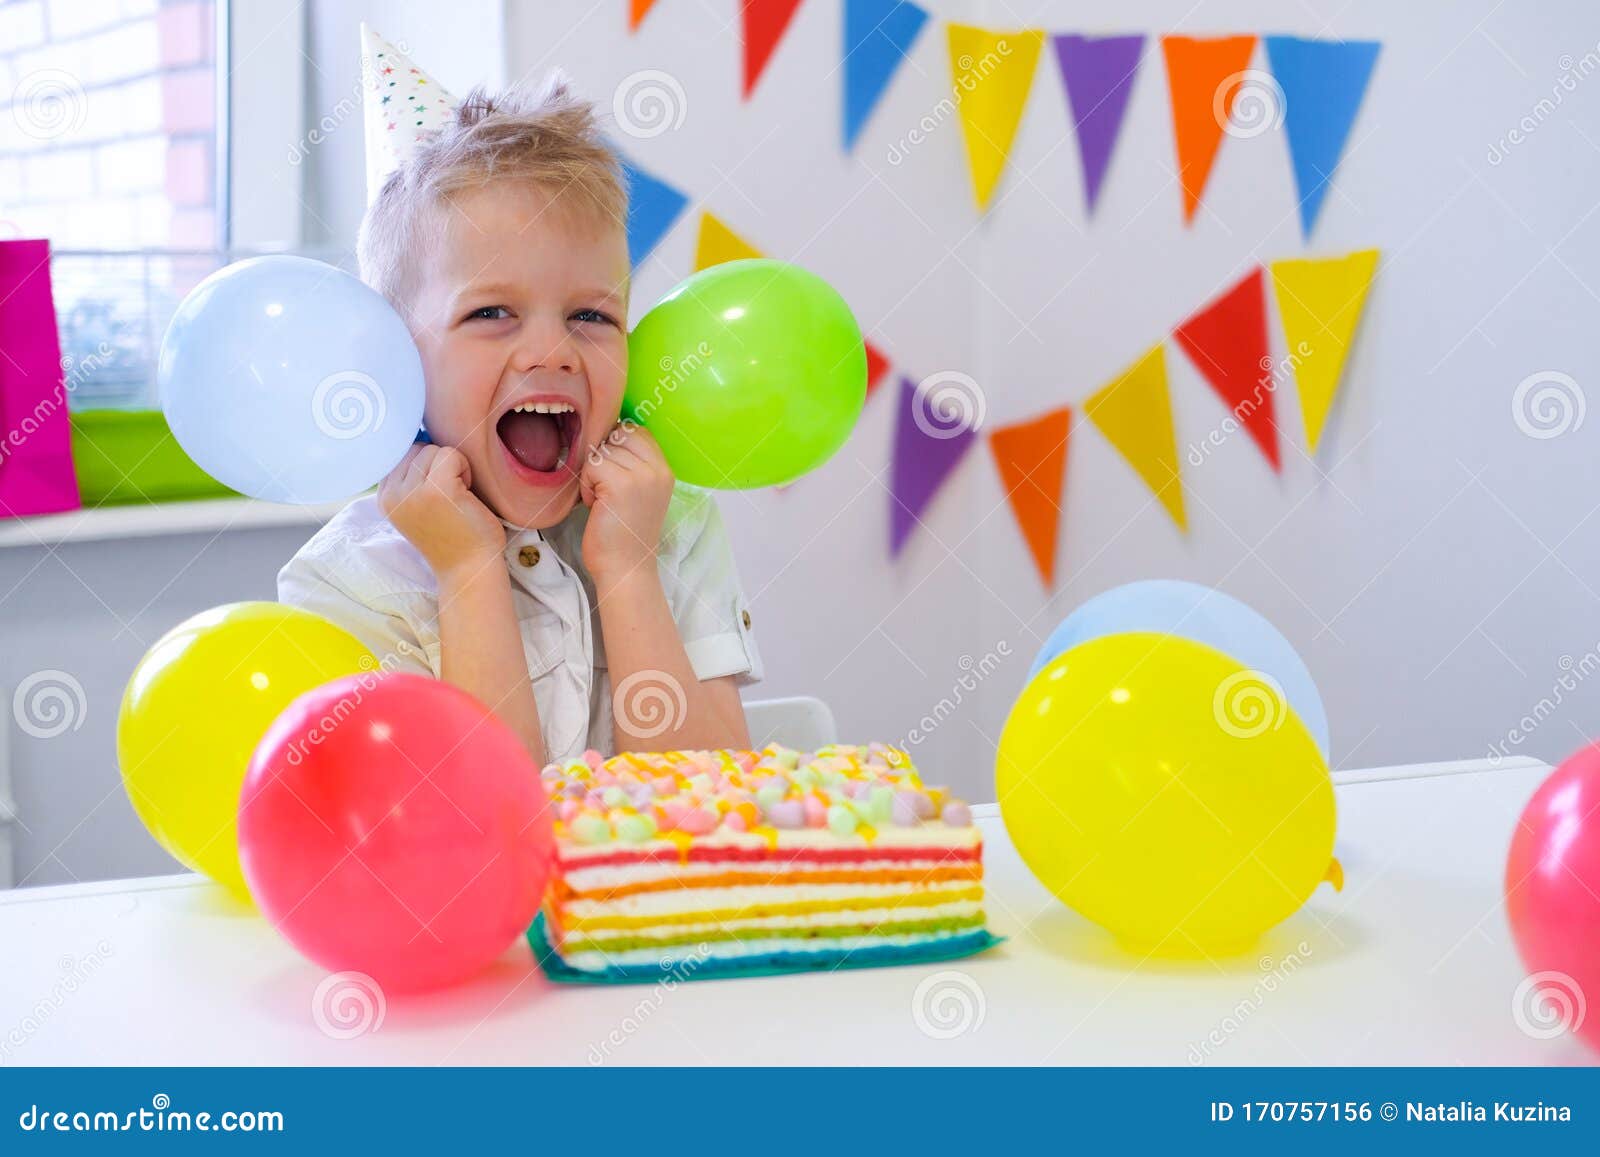 Excited Birthday Boy with Colorful Balloons Near Birthday Rainbow Cake.  Festivel Background Stock Photo - Image of kids, expression: 170757156